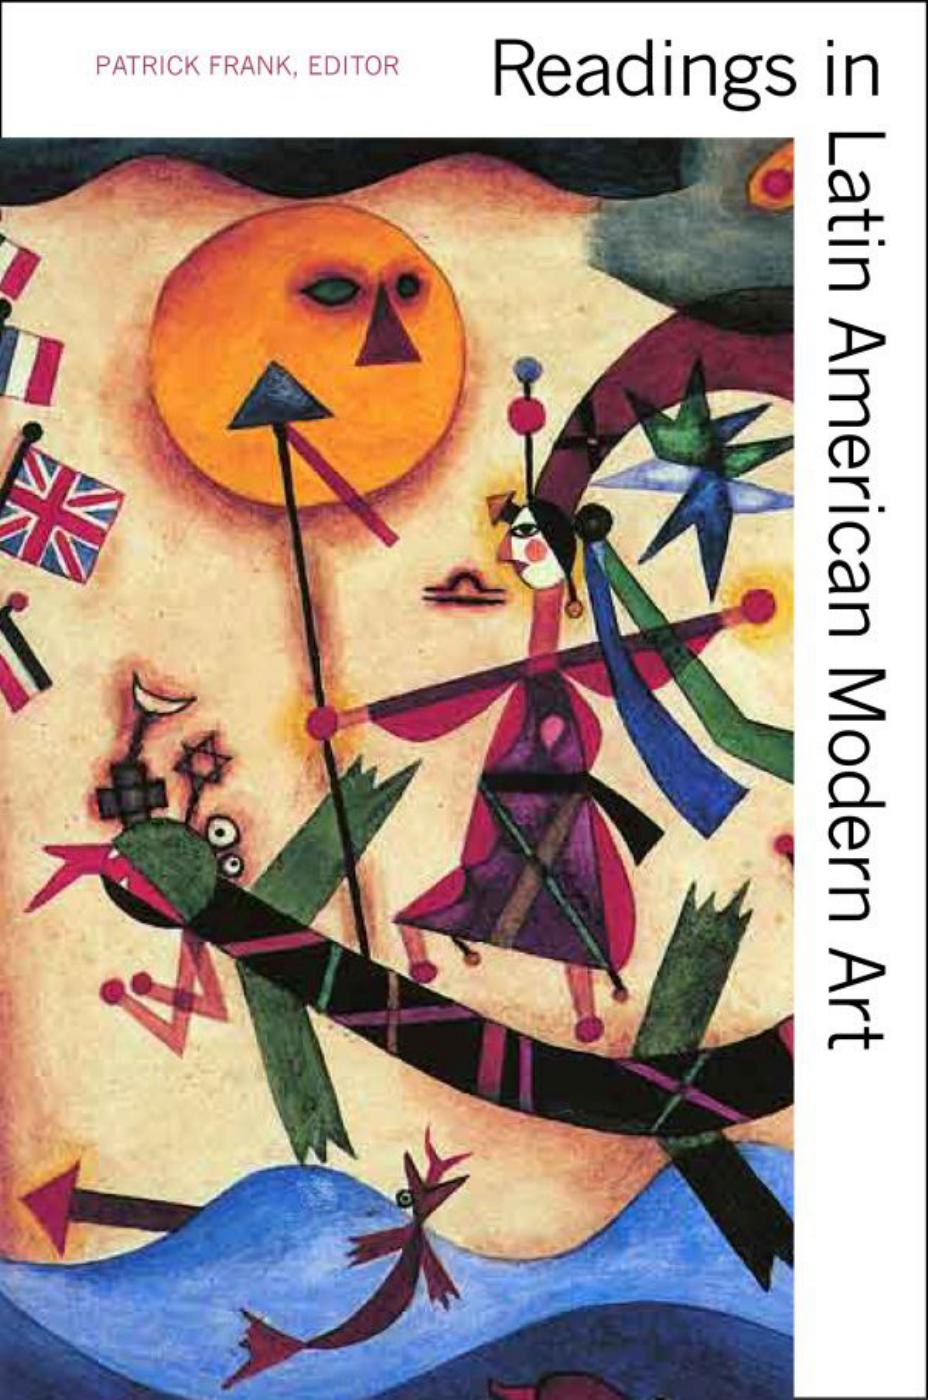 Readings in Latin American modern art by edited by Patrick Frank